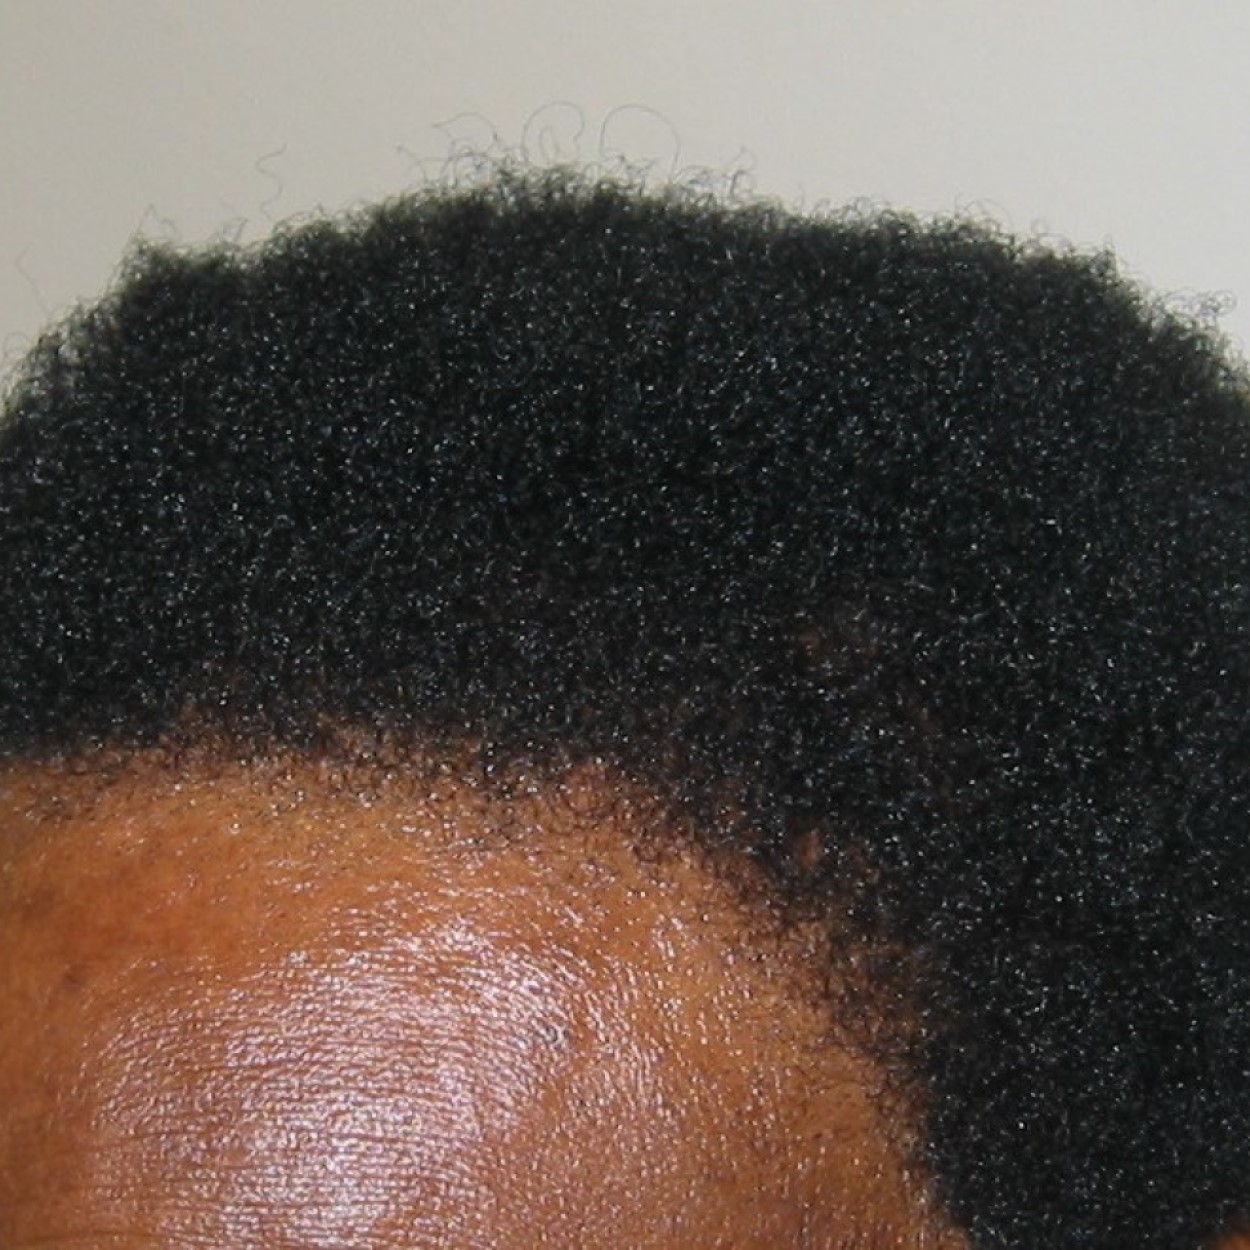 FUE Vs FUT: What’s The Difference?, Wimpole Clinic